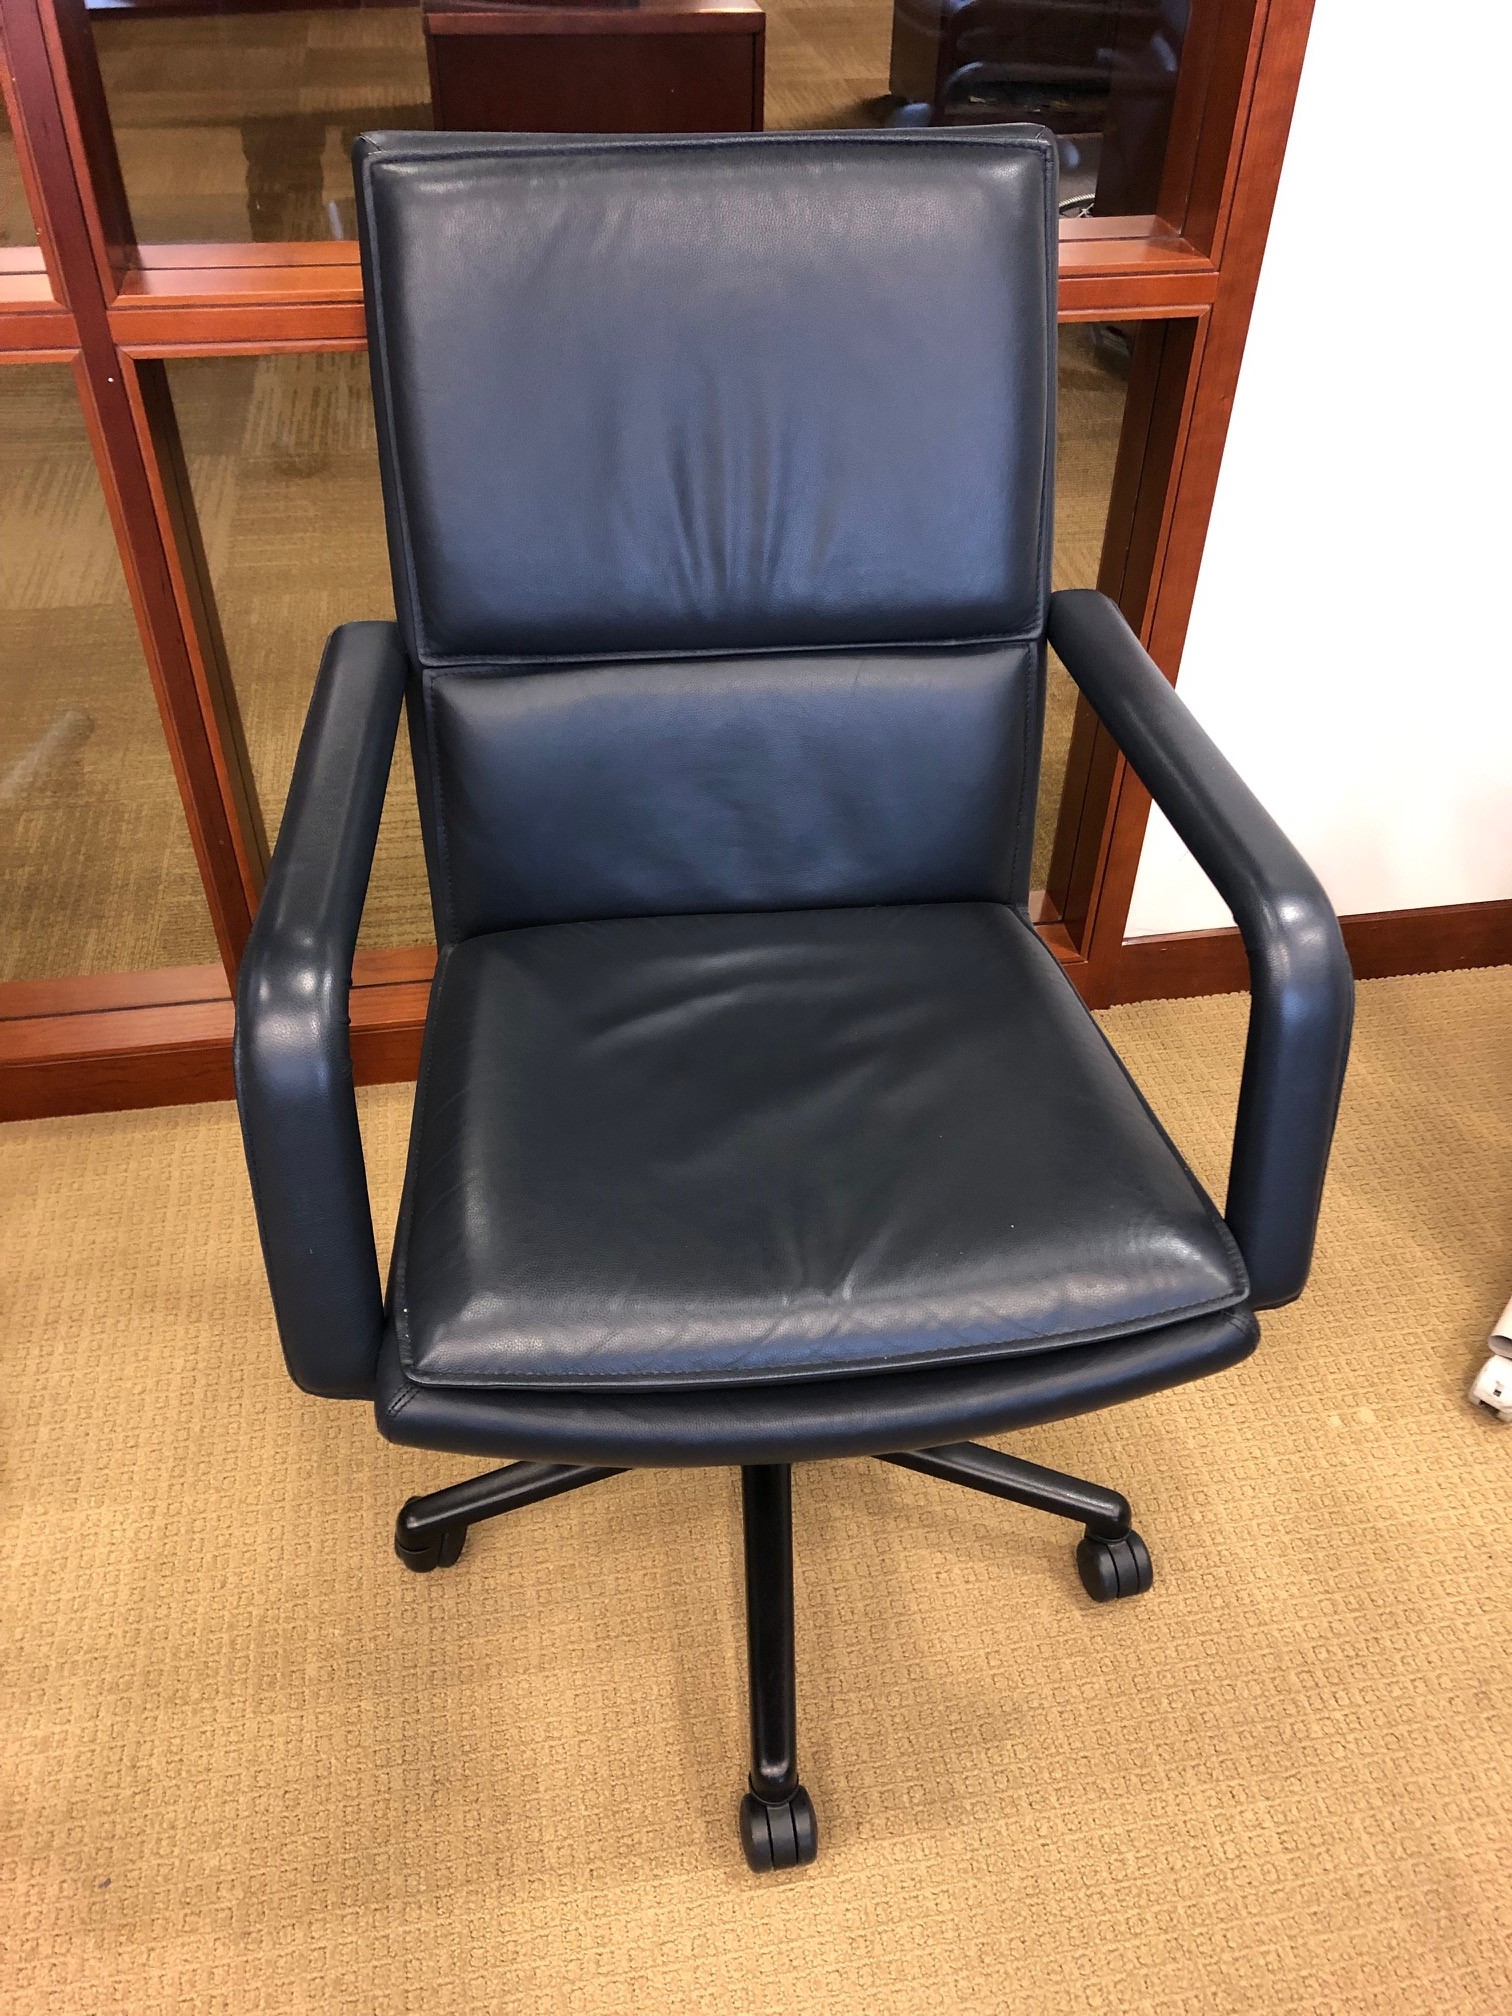 C61394 - Bernhardt Conference Chairs